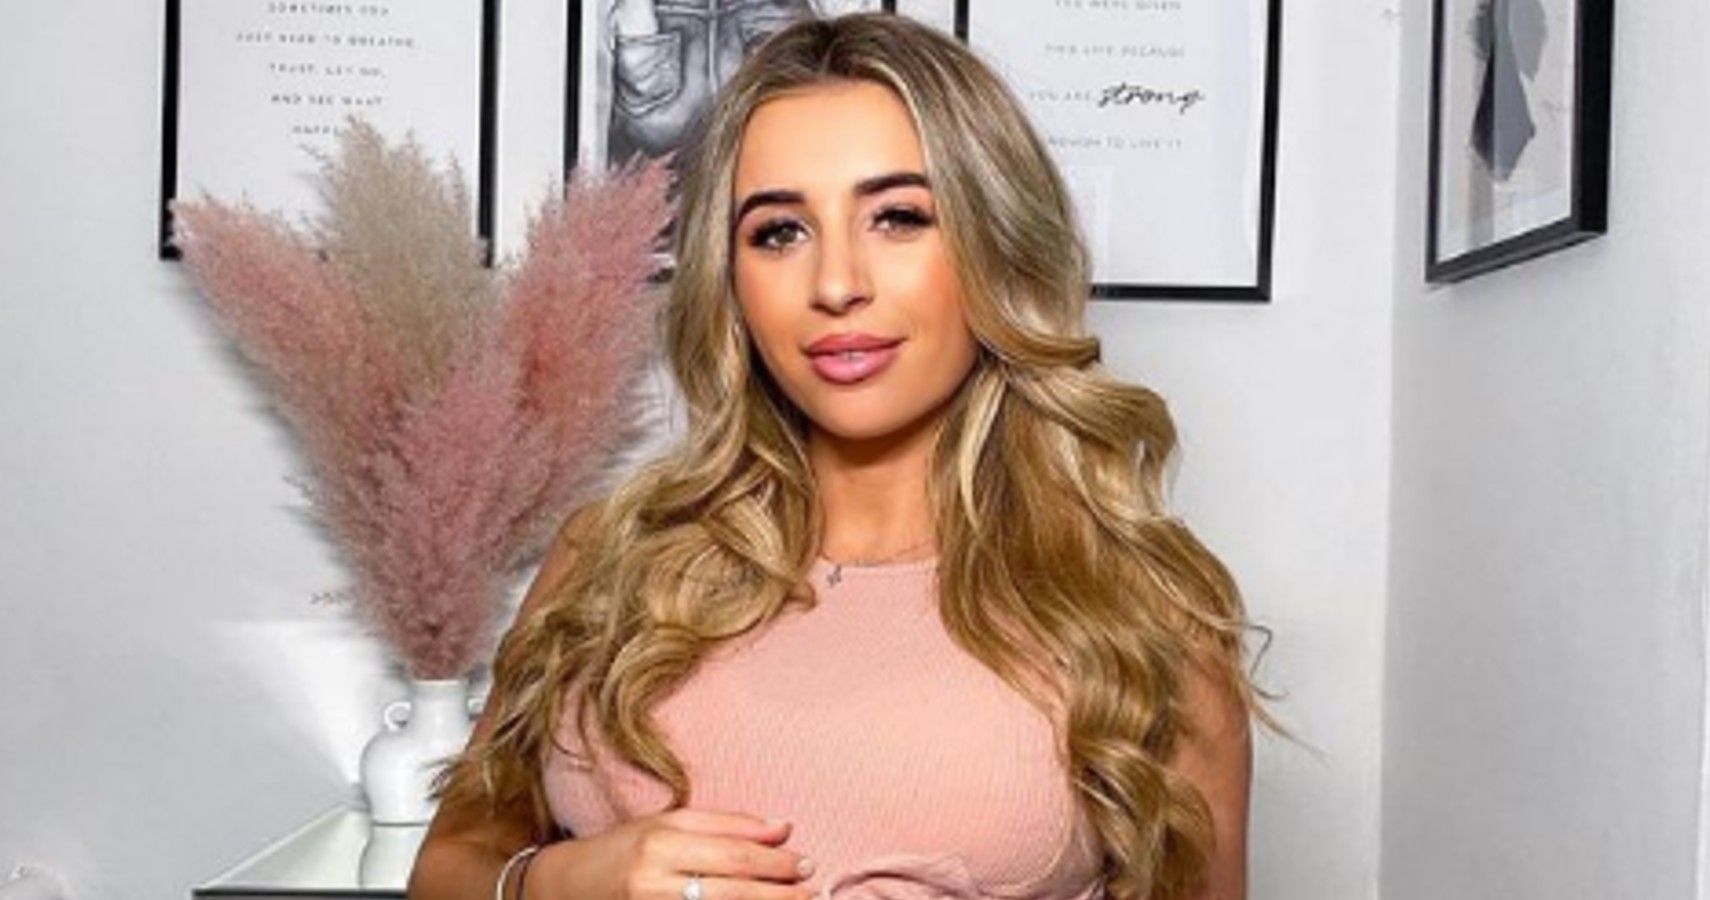 Dani Dyer gives birth to baby boy